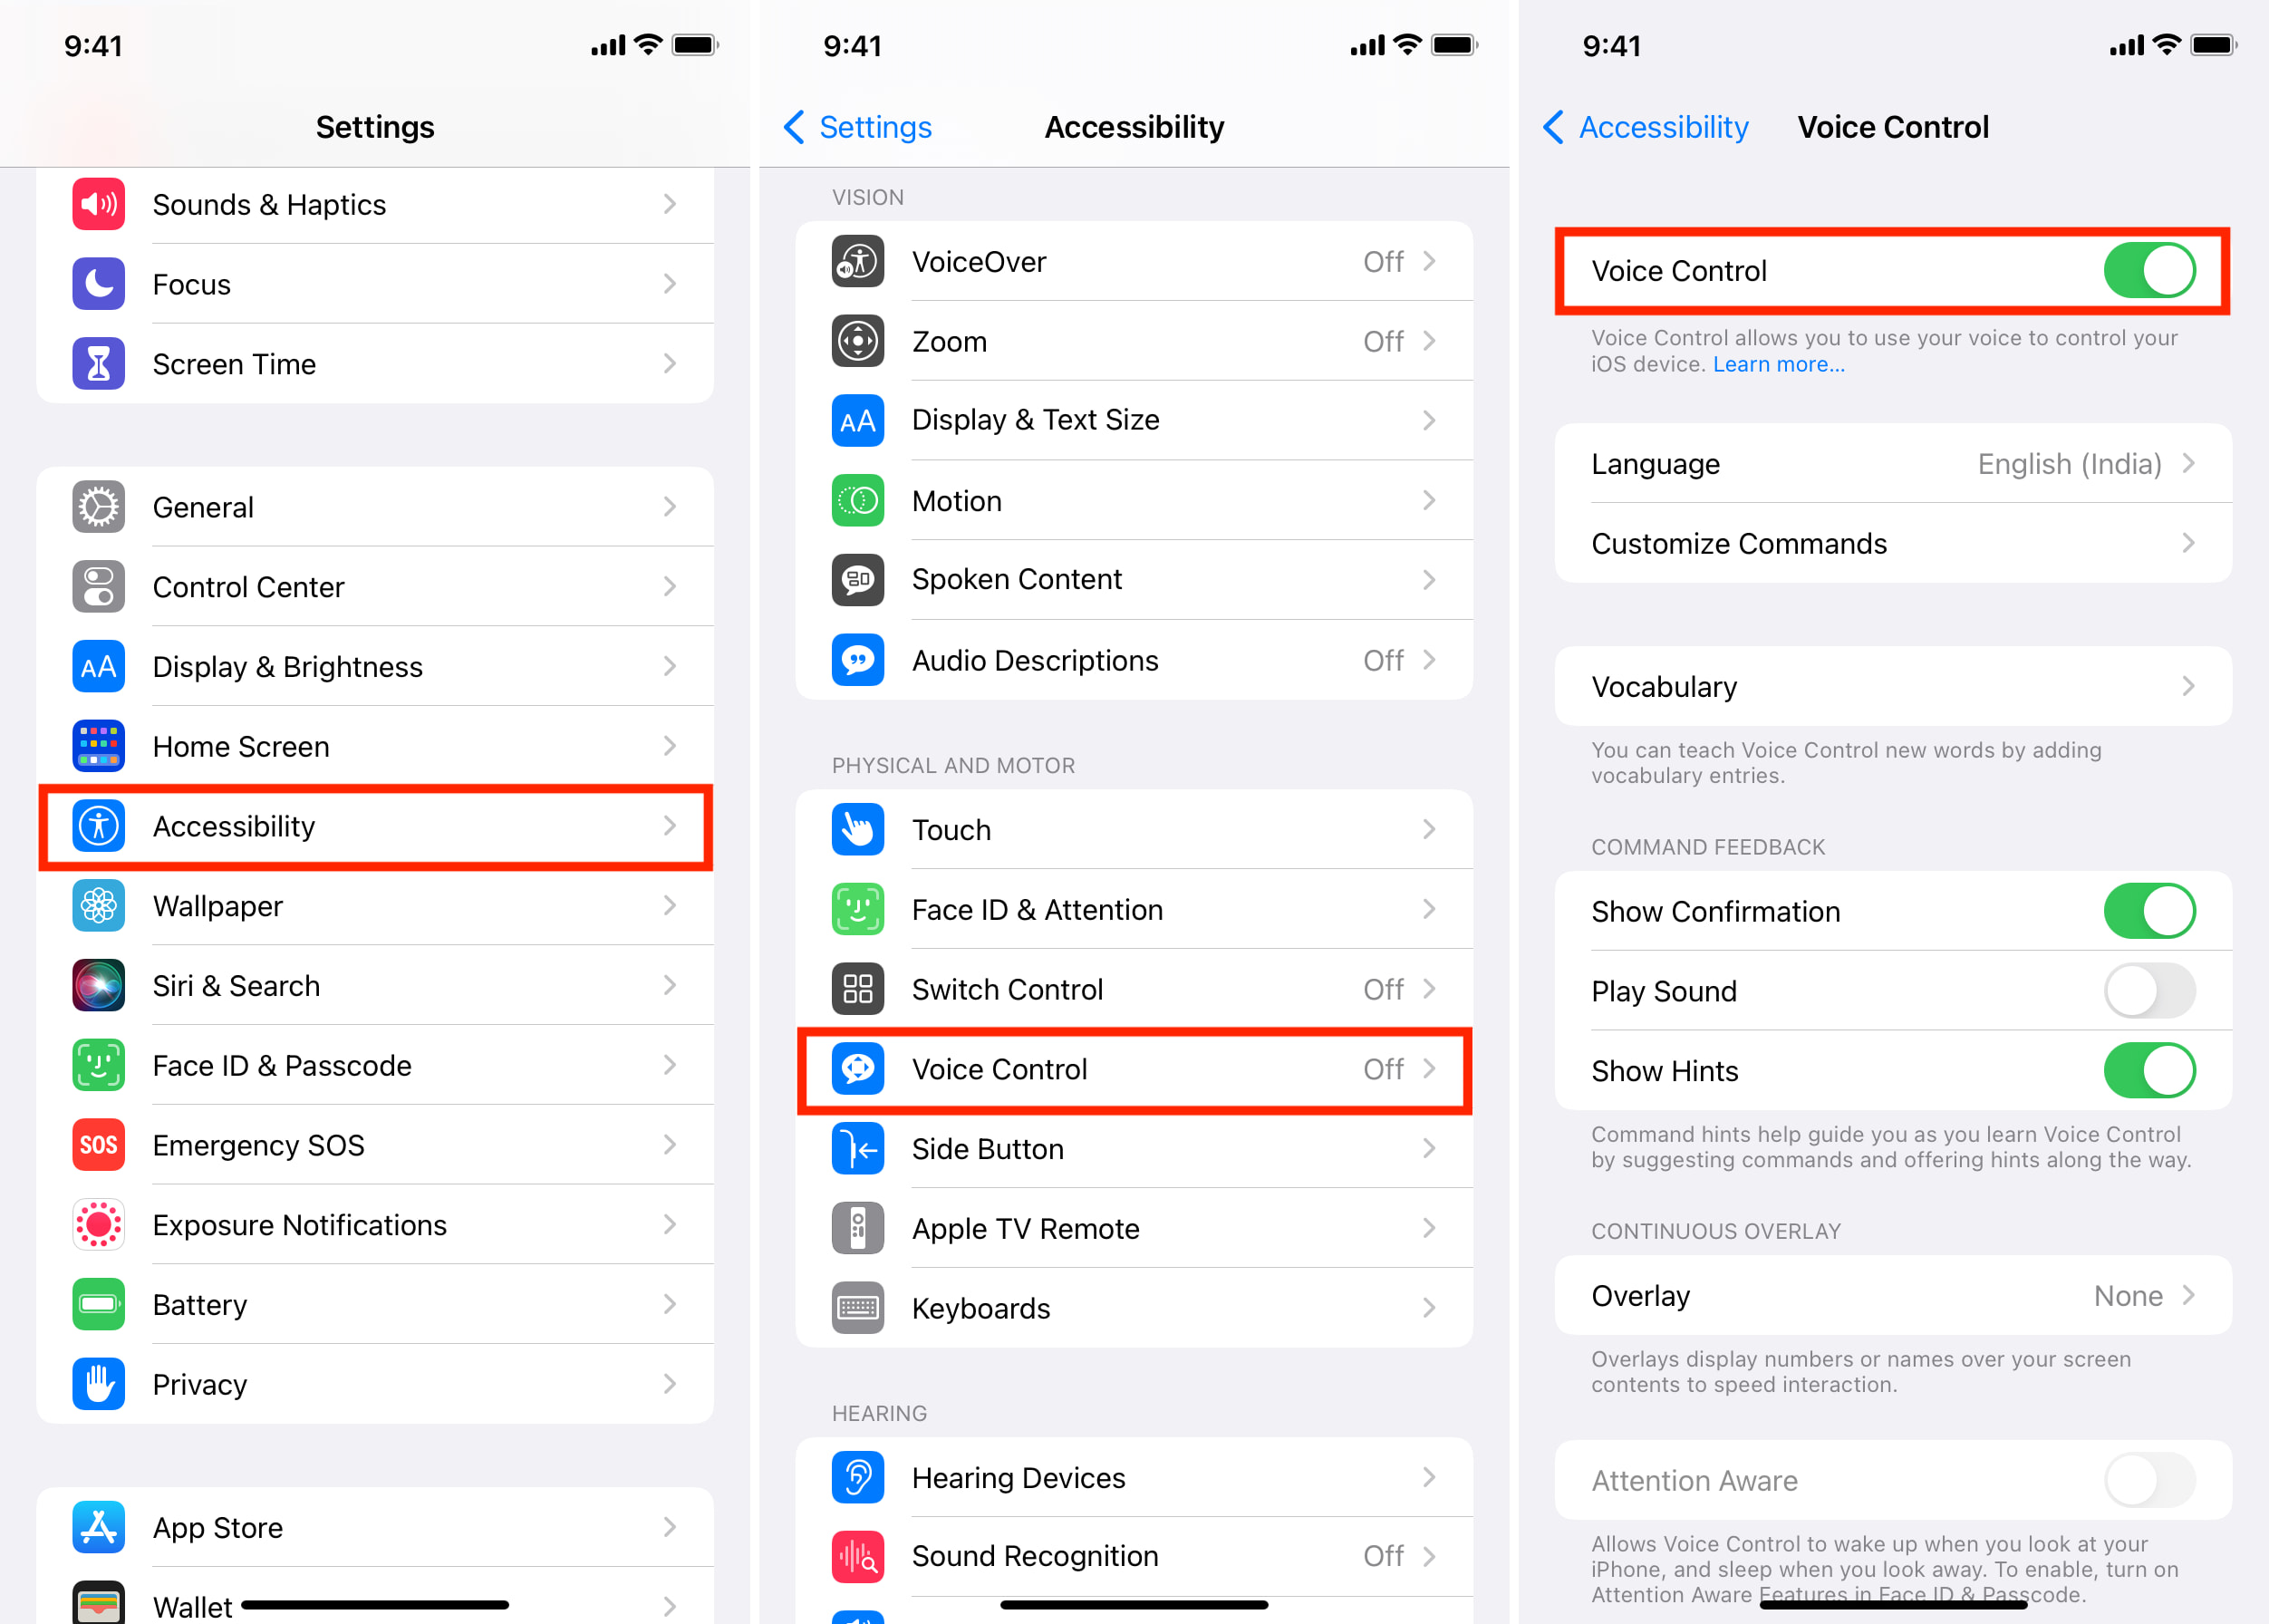 Enable Voice Control from iPhone Accessibility Settings